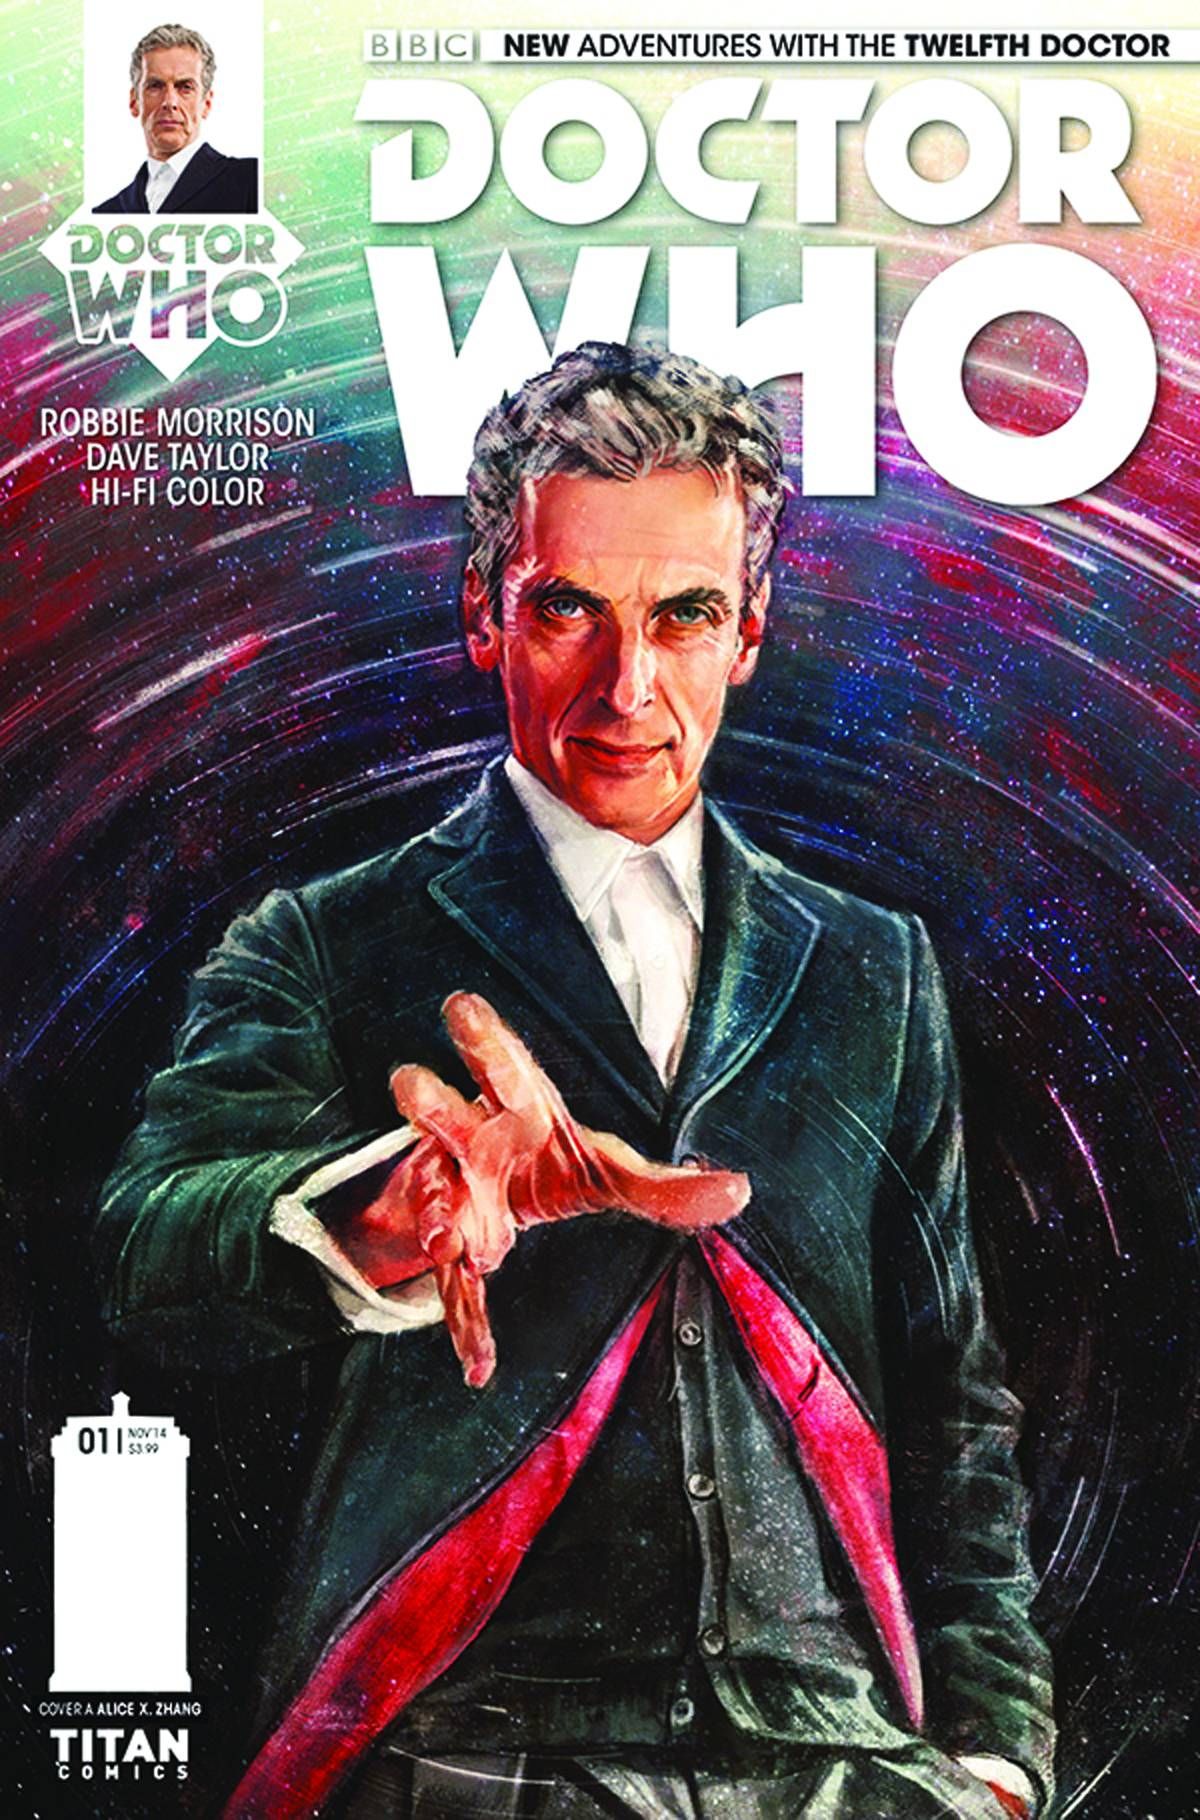 Doctor Who: The Twelfth Doctor #1 Comic